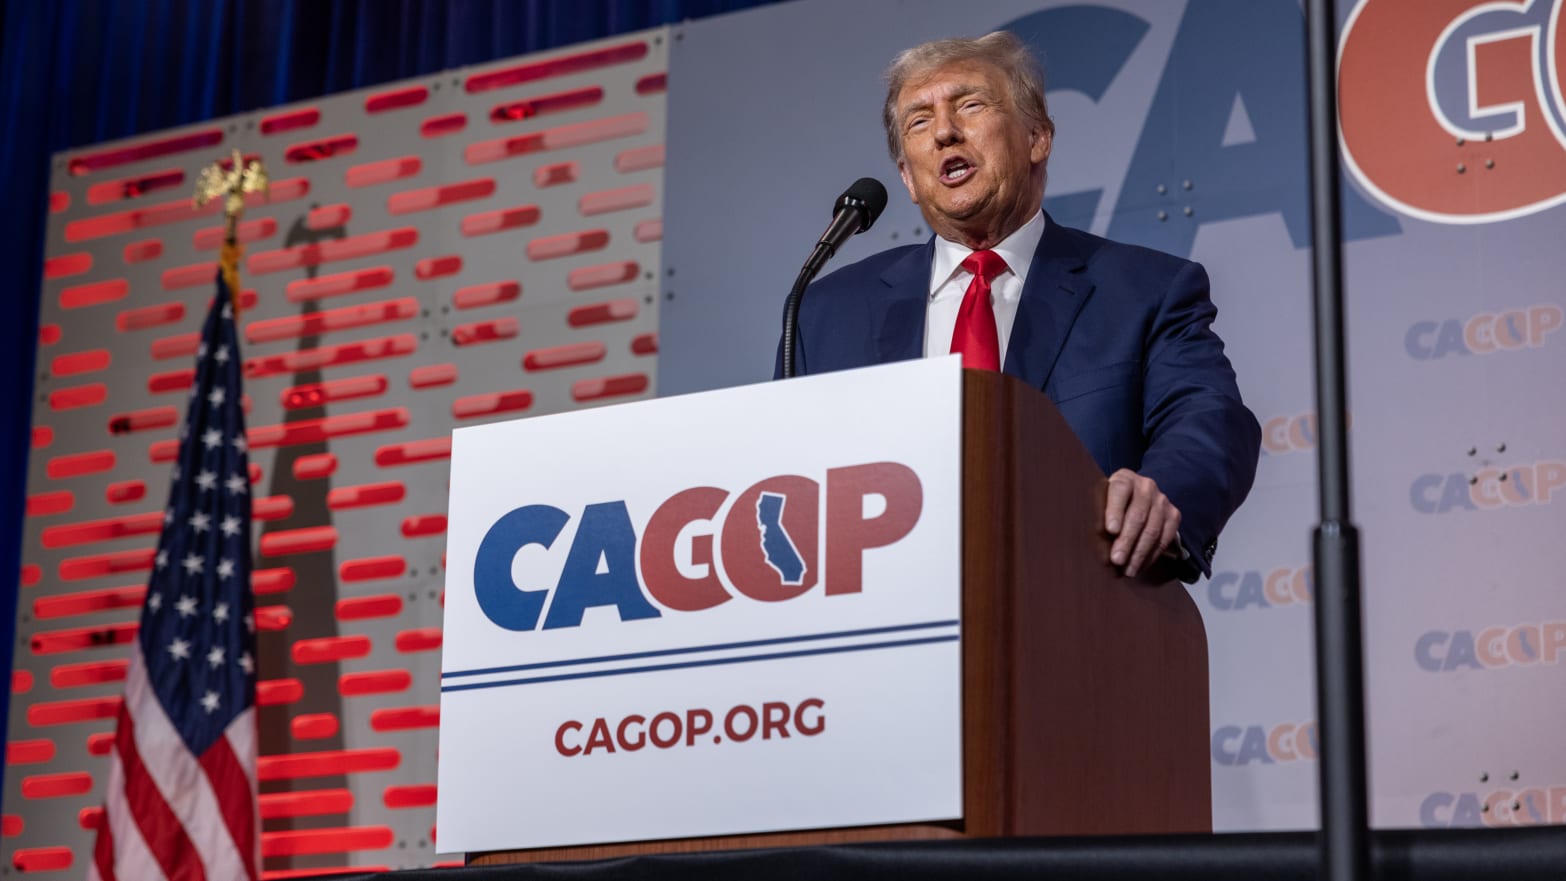 Former U.S. President Donald Trump speaks at the California GOP Fall convention.